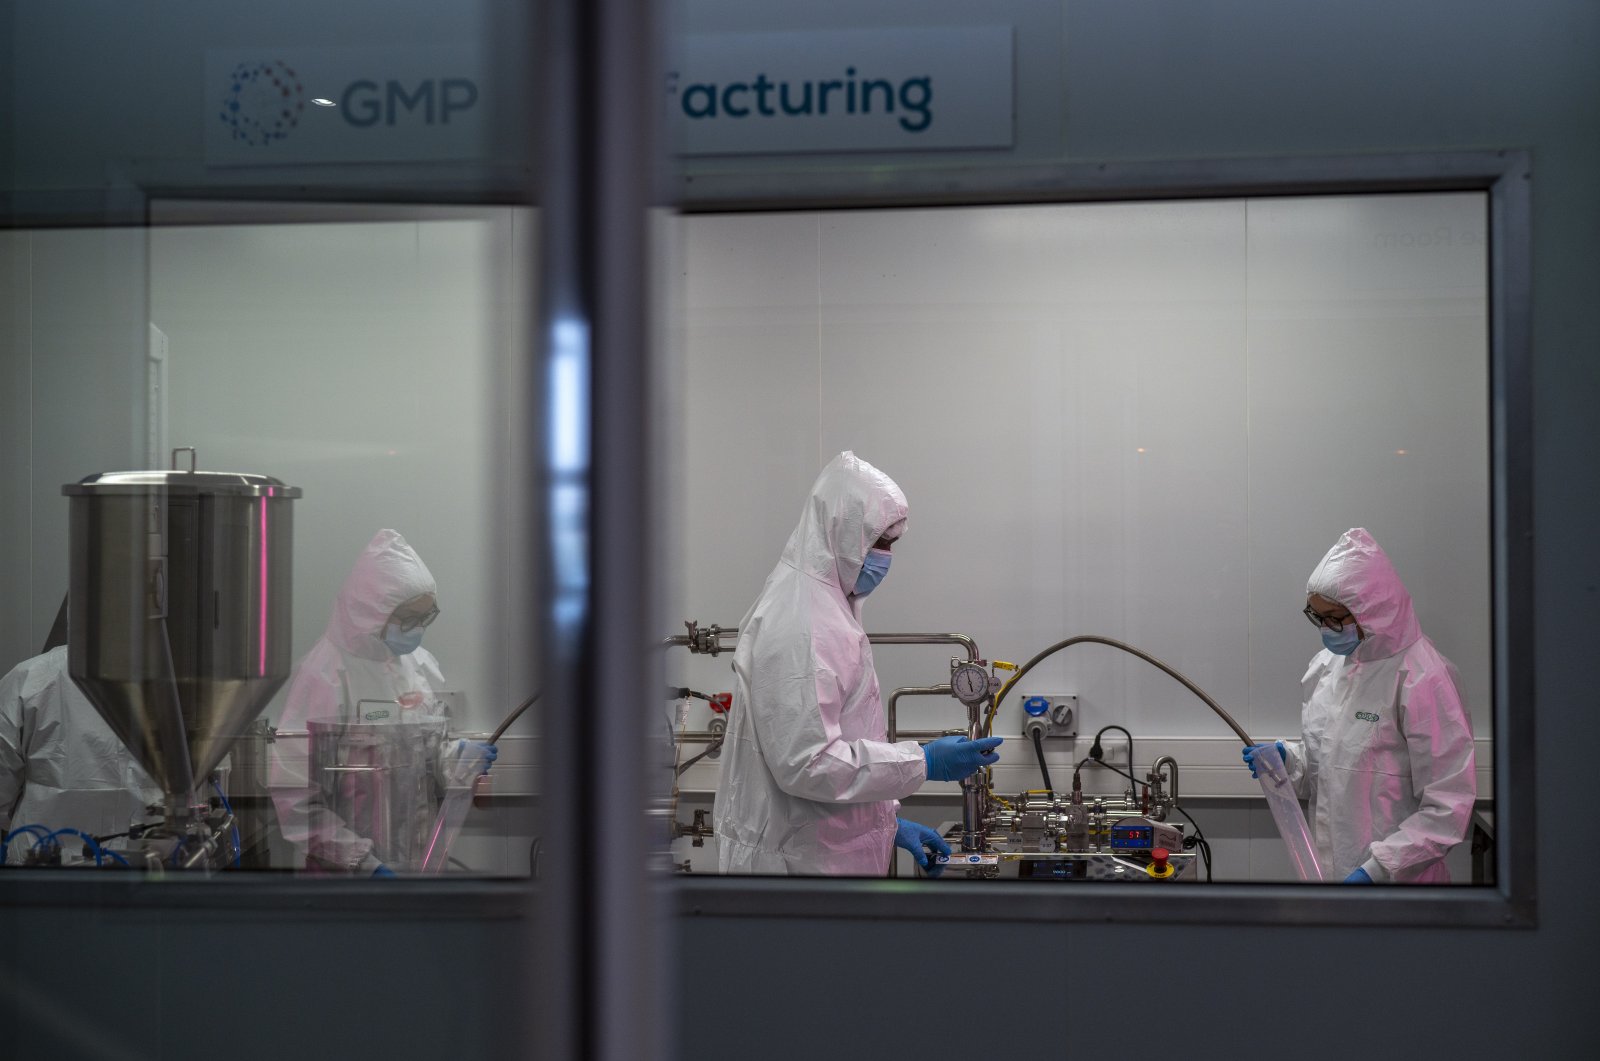 Scientists re-enact the calibration procedure of equipment at an Afrigen Biologics and Vaccines facility in Cape Town, South Africa, Oct. 19, 2021. (AP Photo)